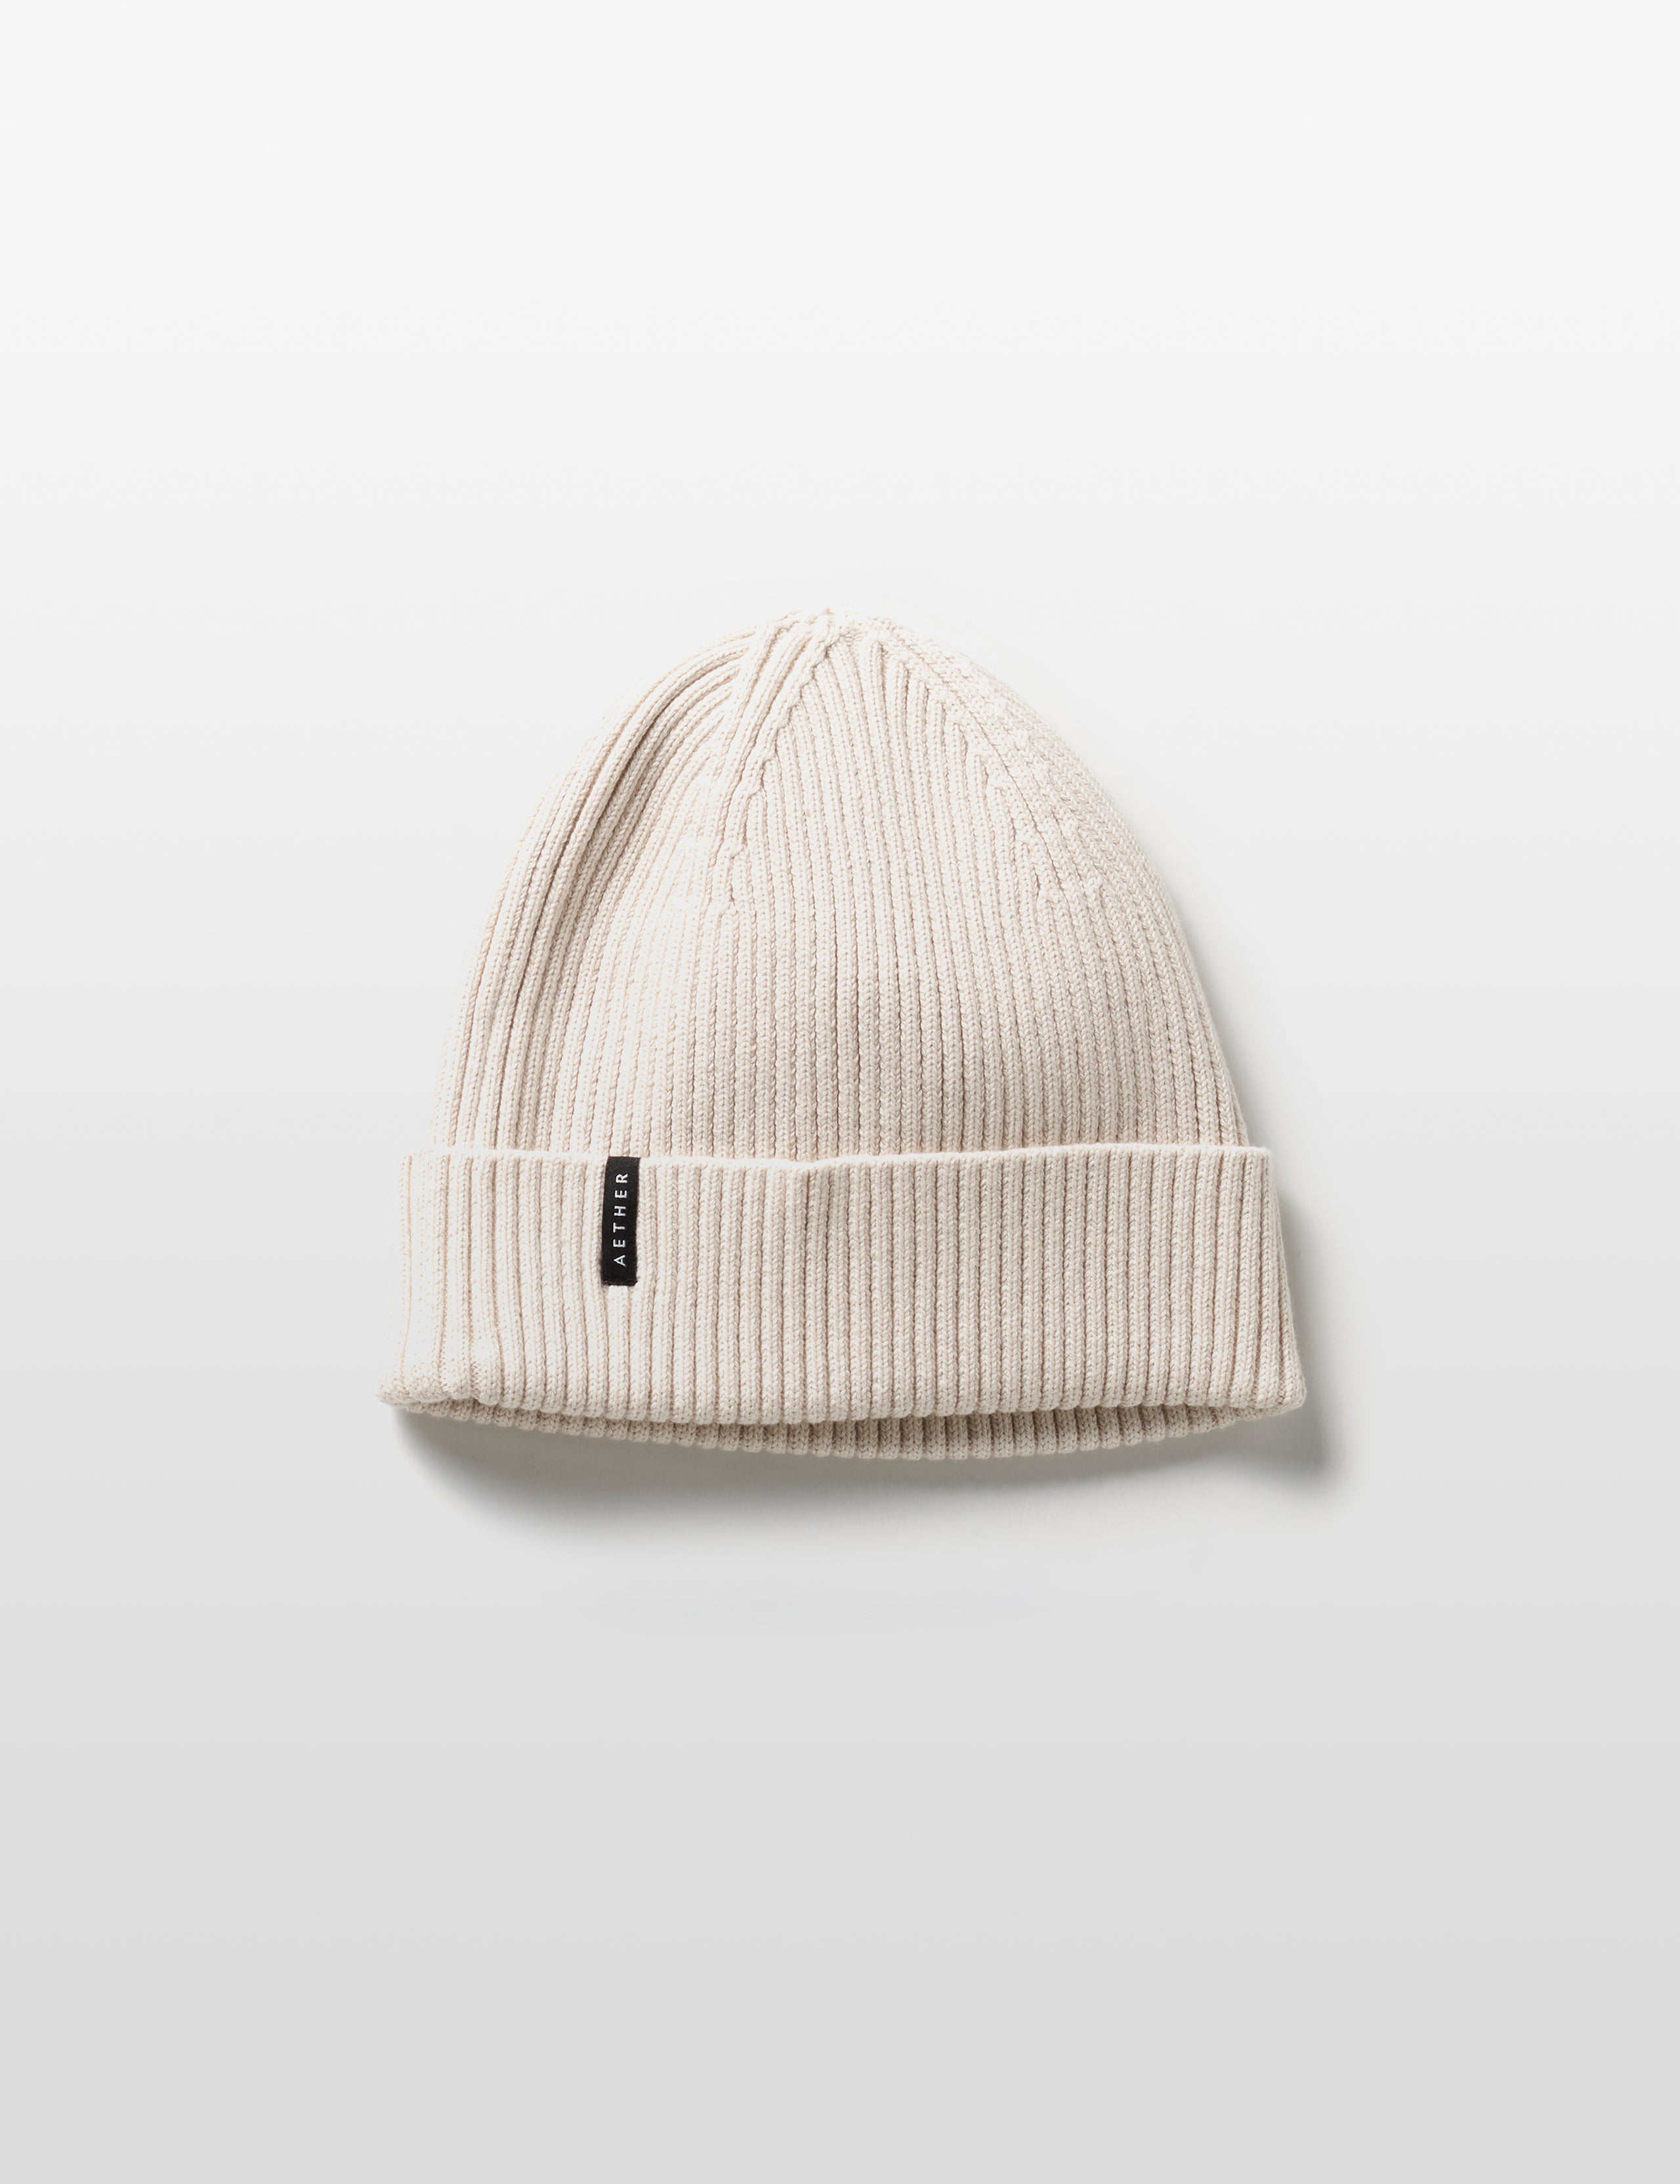 white cotton beanie from AETHER Apparel